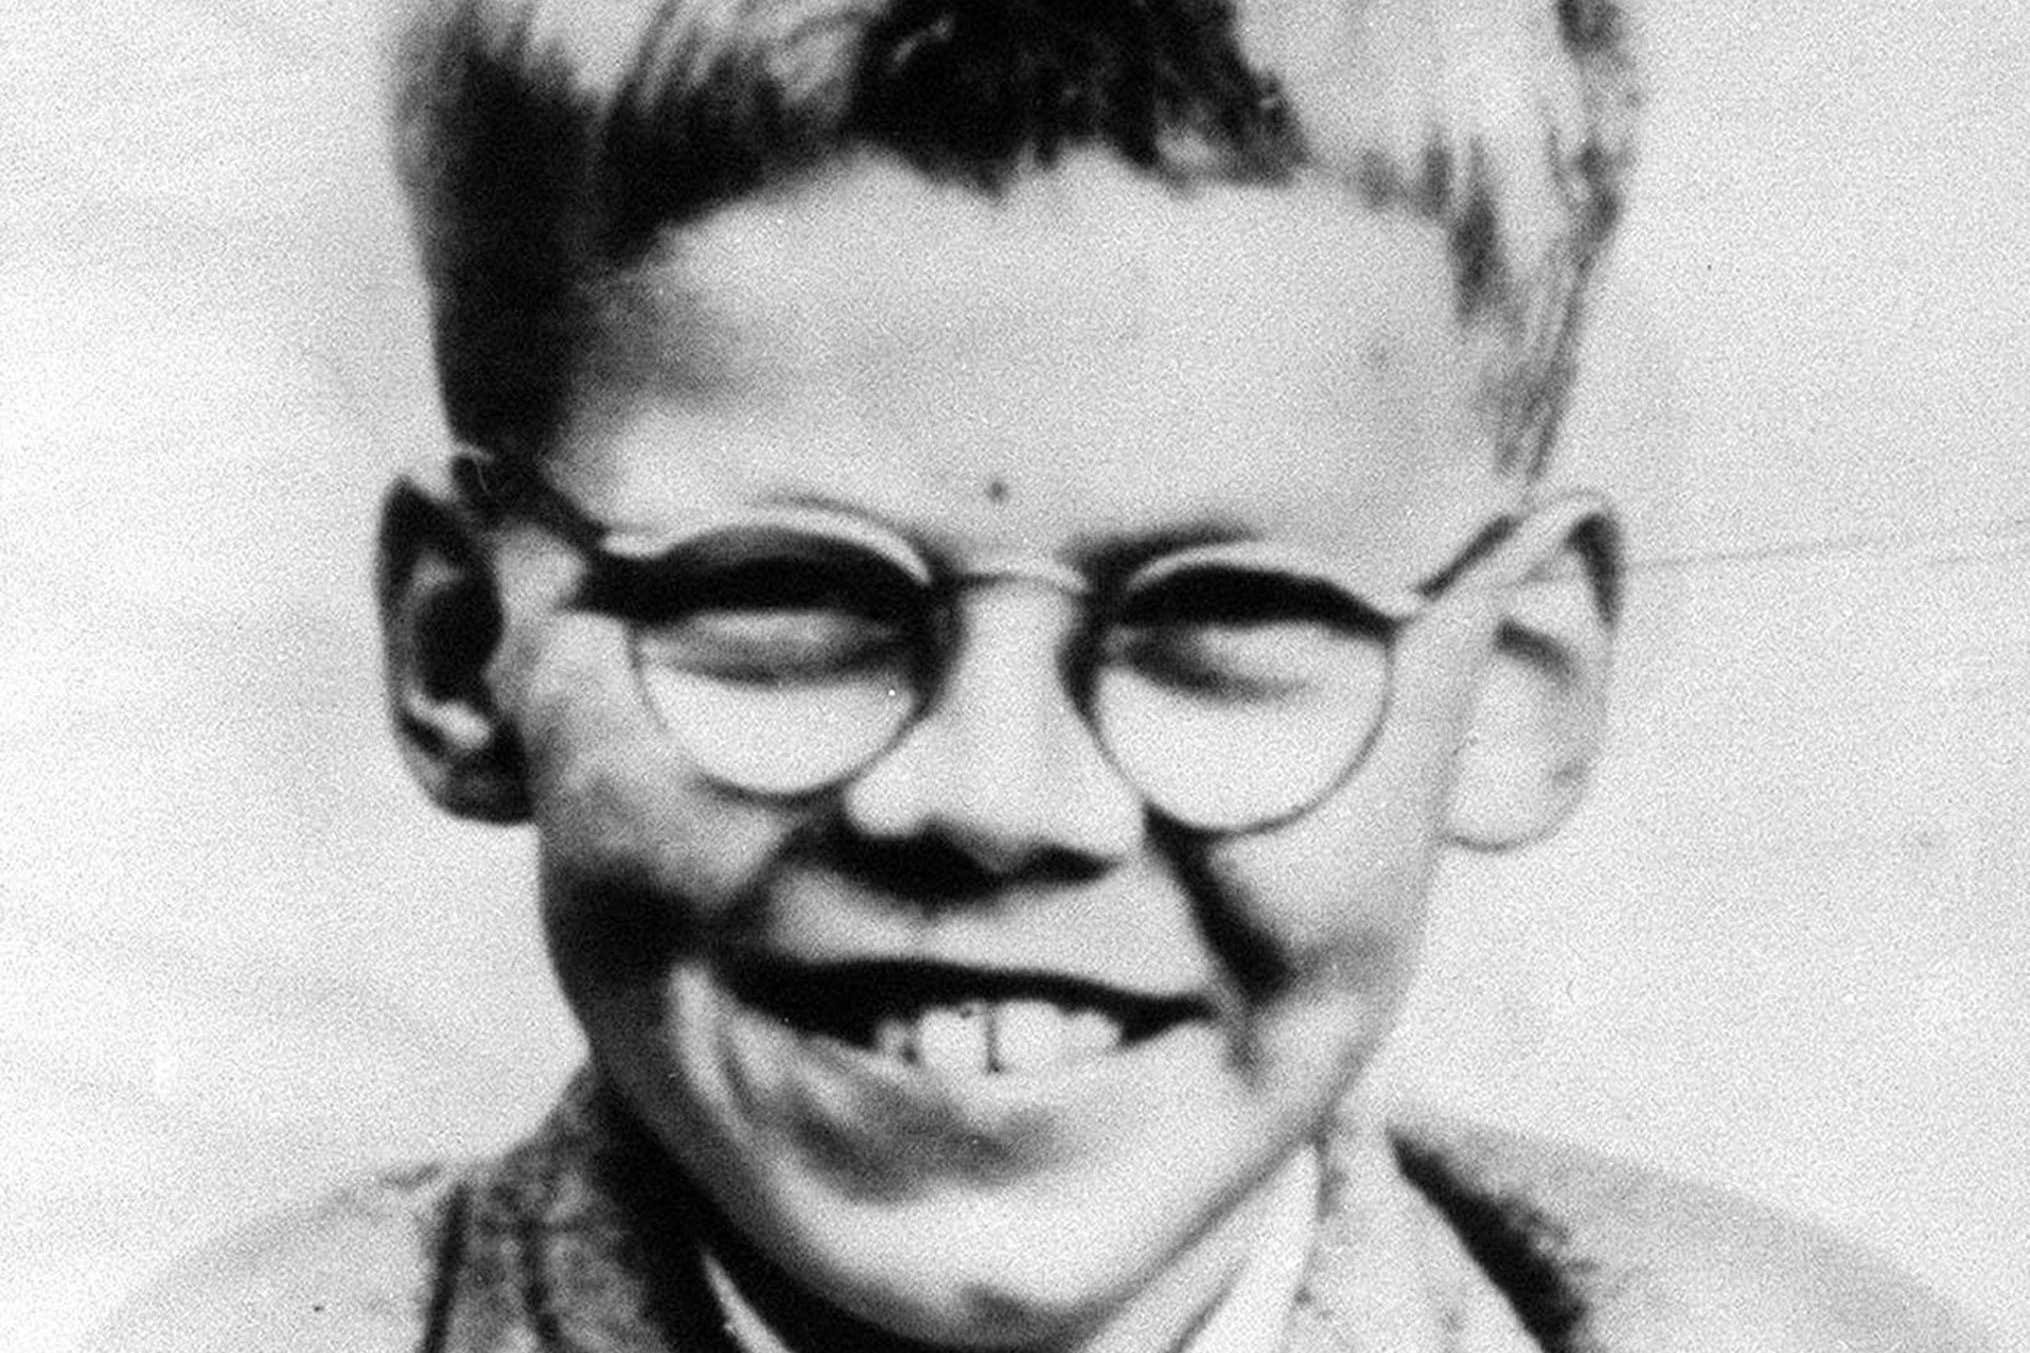 Keith Bennett was murdered by Myra Hindley and Ian Brady in 1964 but his body has never been found